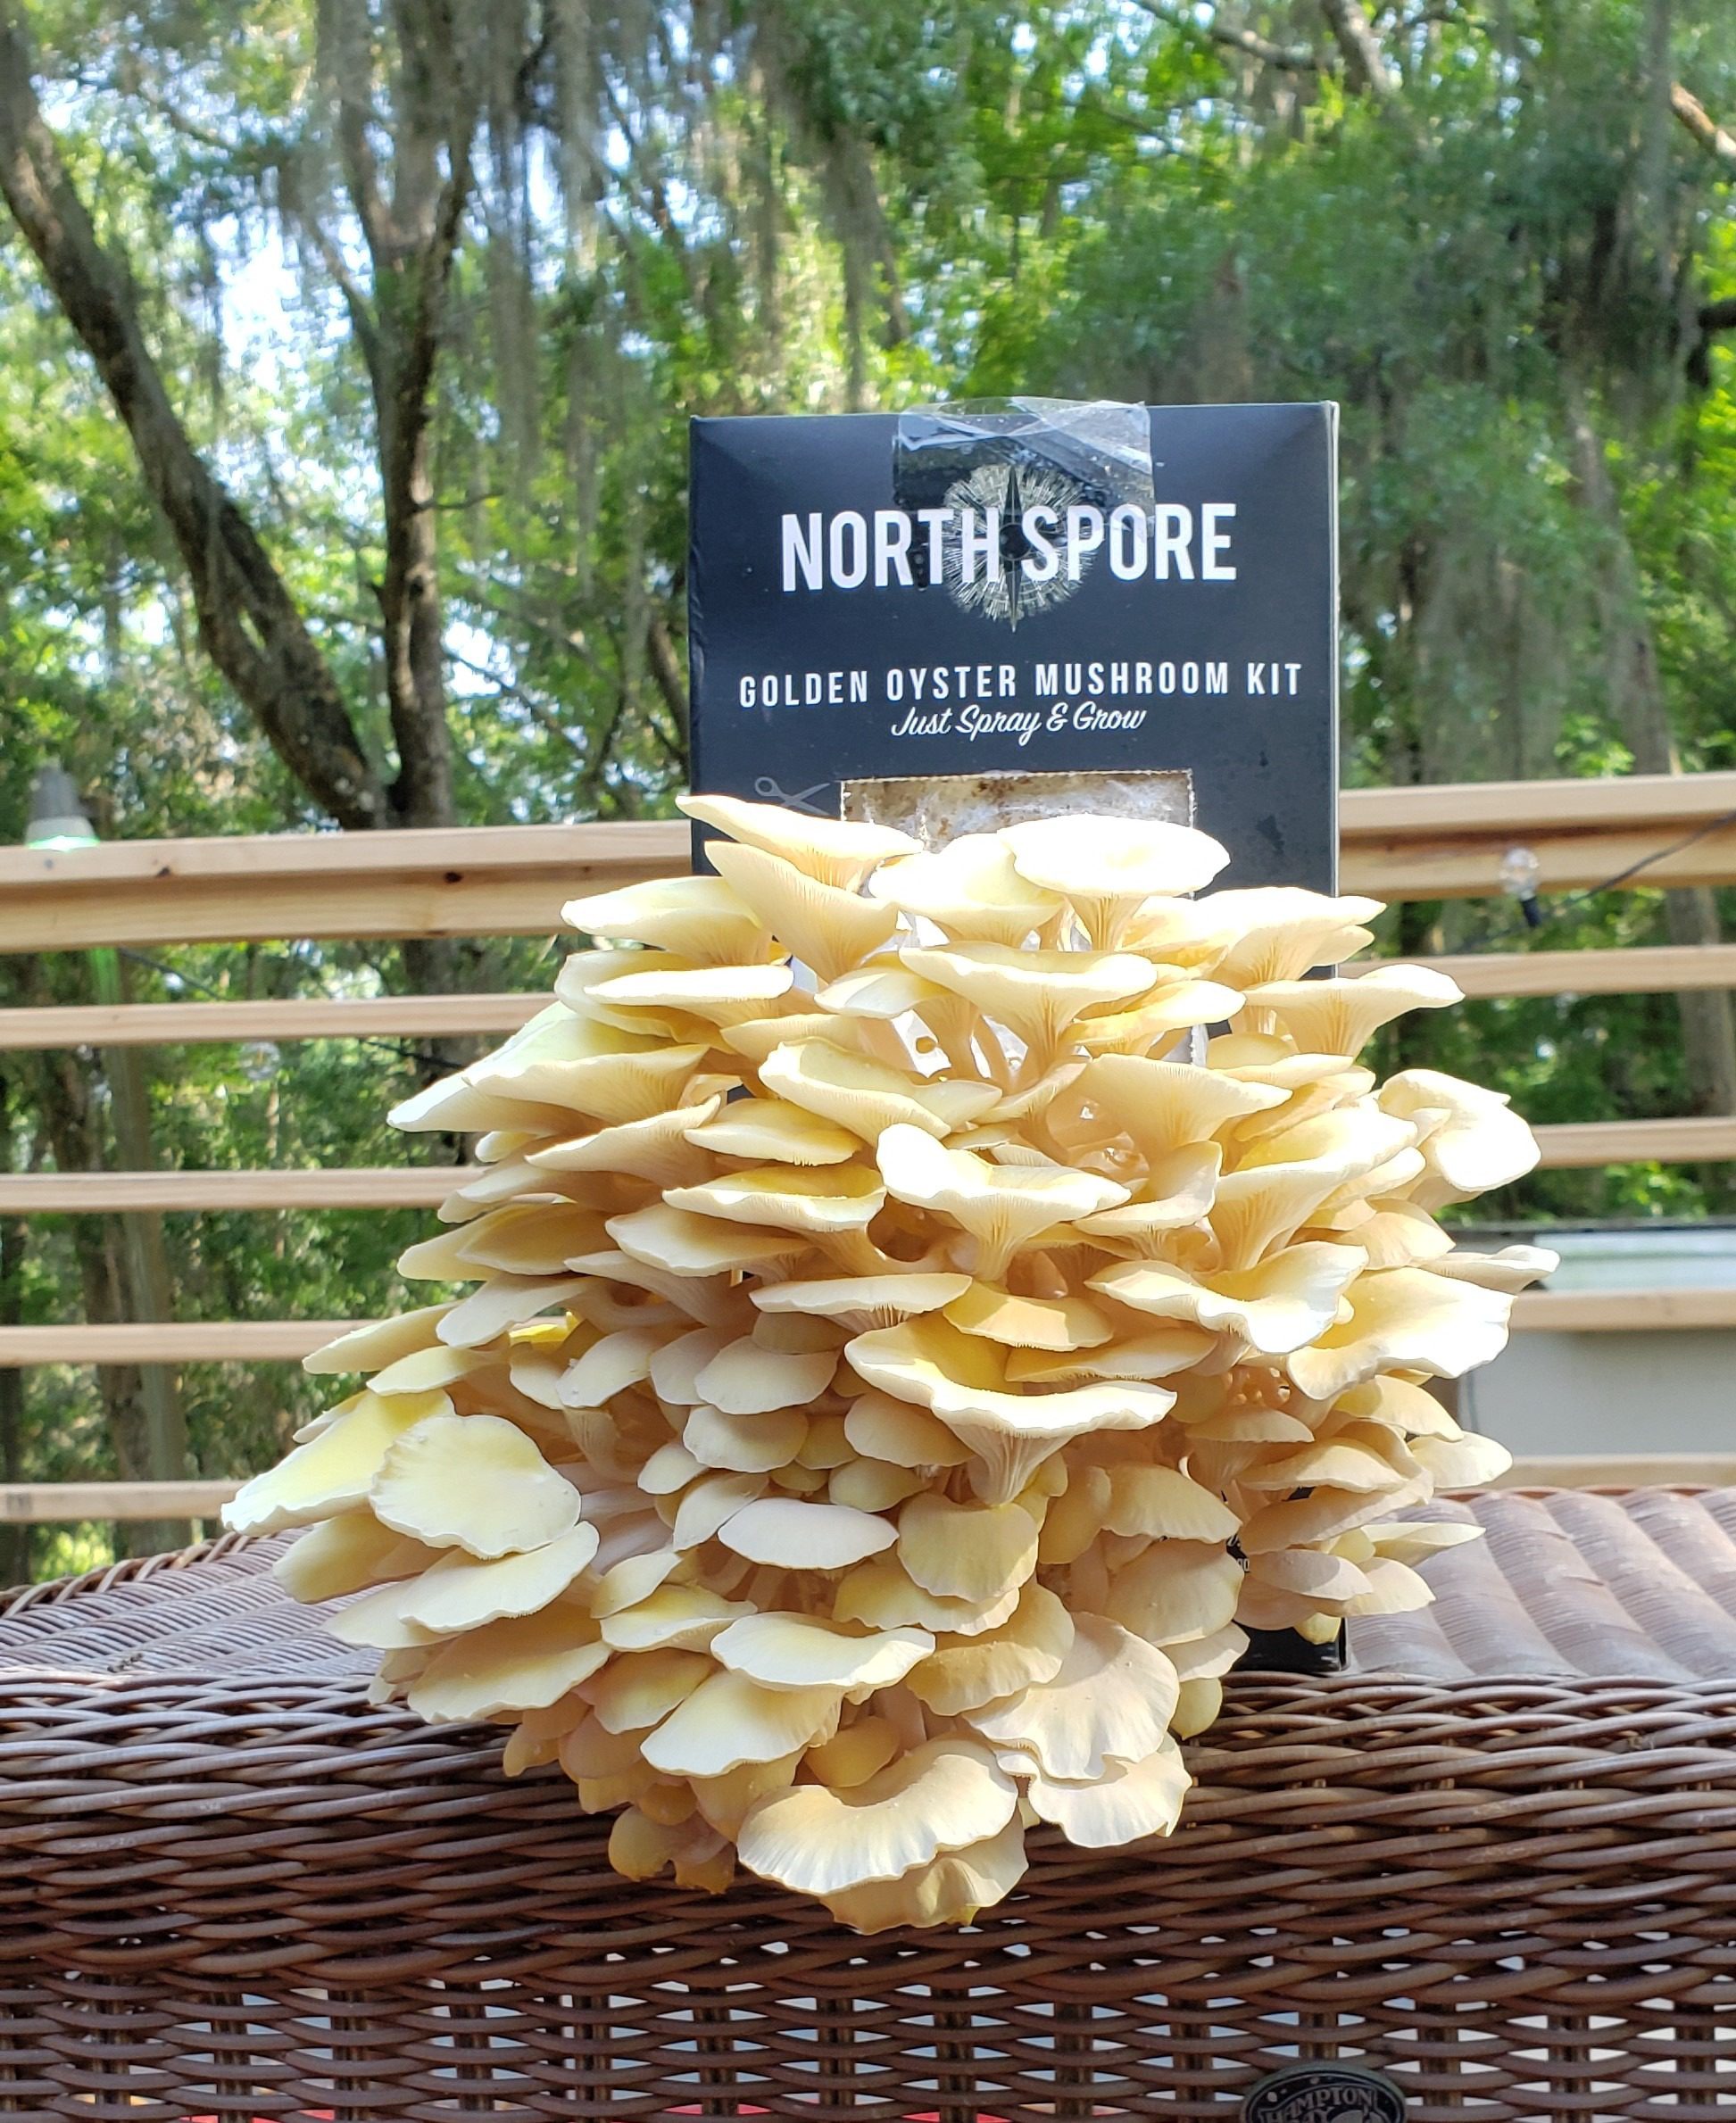 You are currently viewing Fun with Fungi/North Spore homegrown mushroom kit.